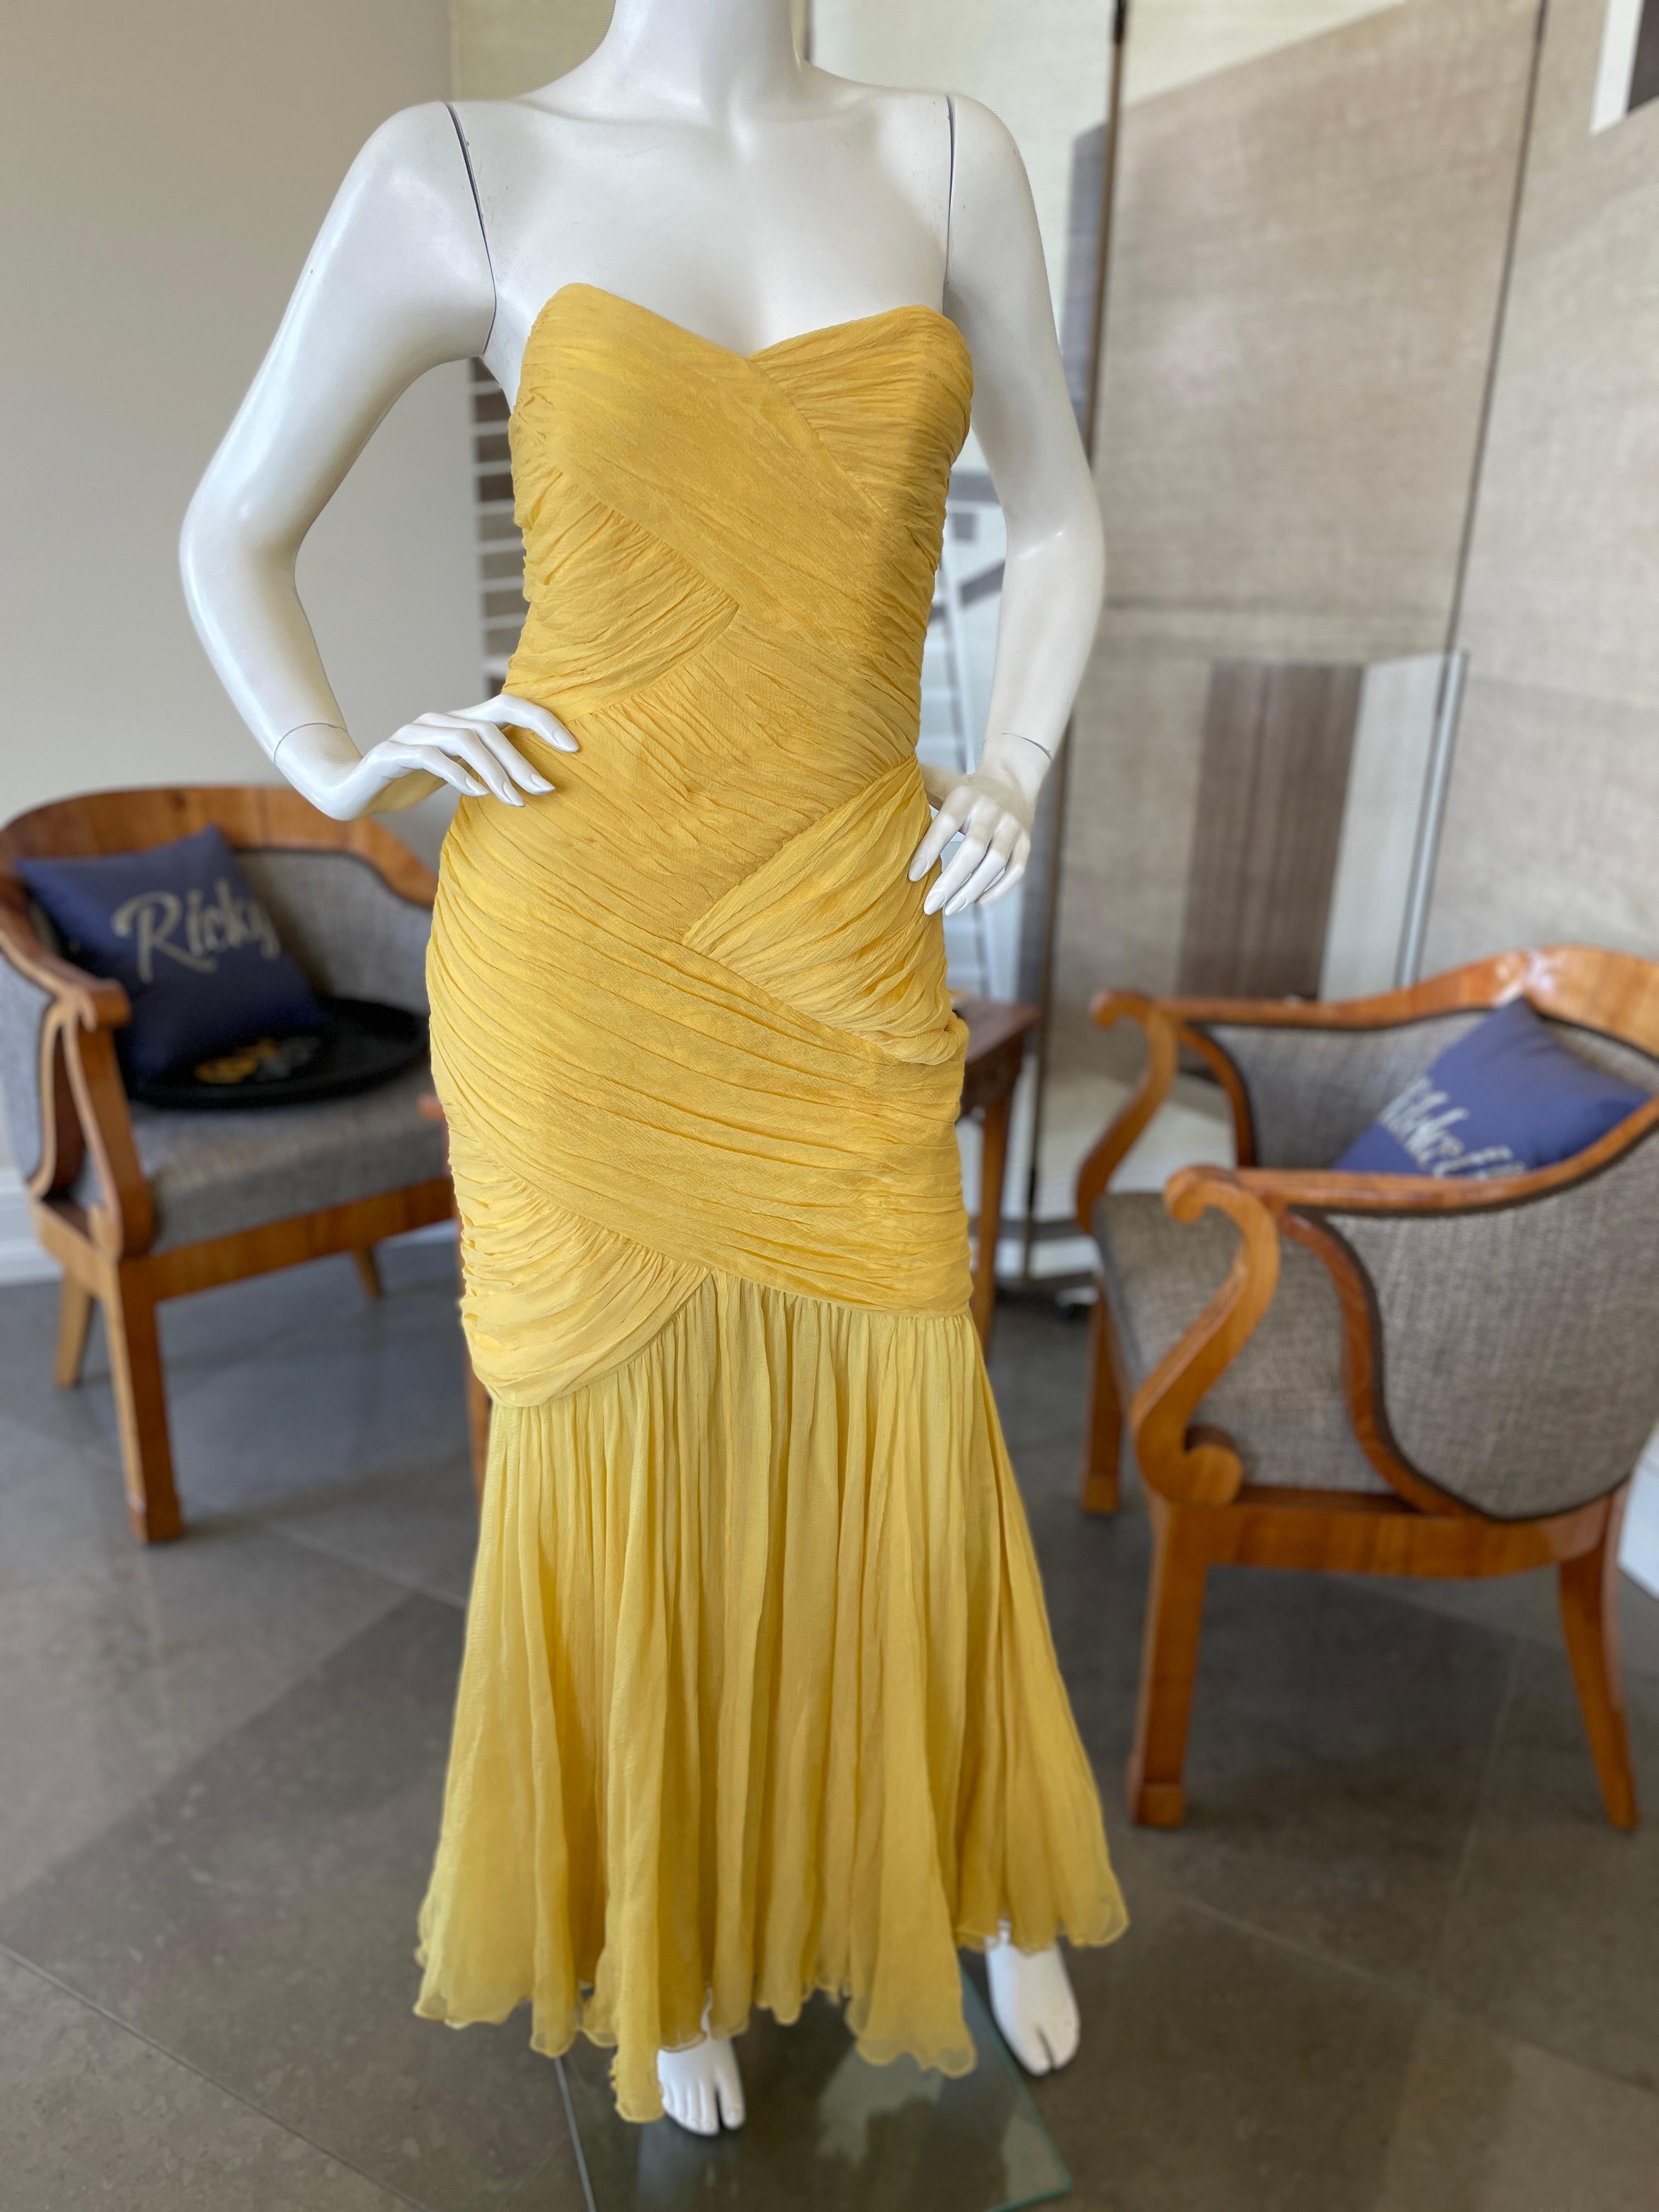 David Fielden London Yellow Silk Chiffon Strapless Dress with Matching Shawl.
David Fielden was one of the favorite London designer of Princess Diana.
Size 8 from the 80's it's more like a US 4 today
 Bust 34